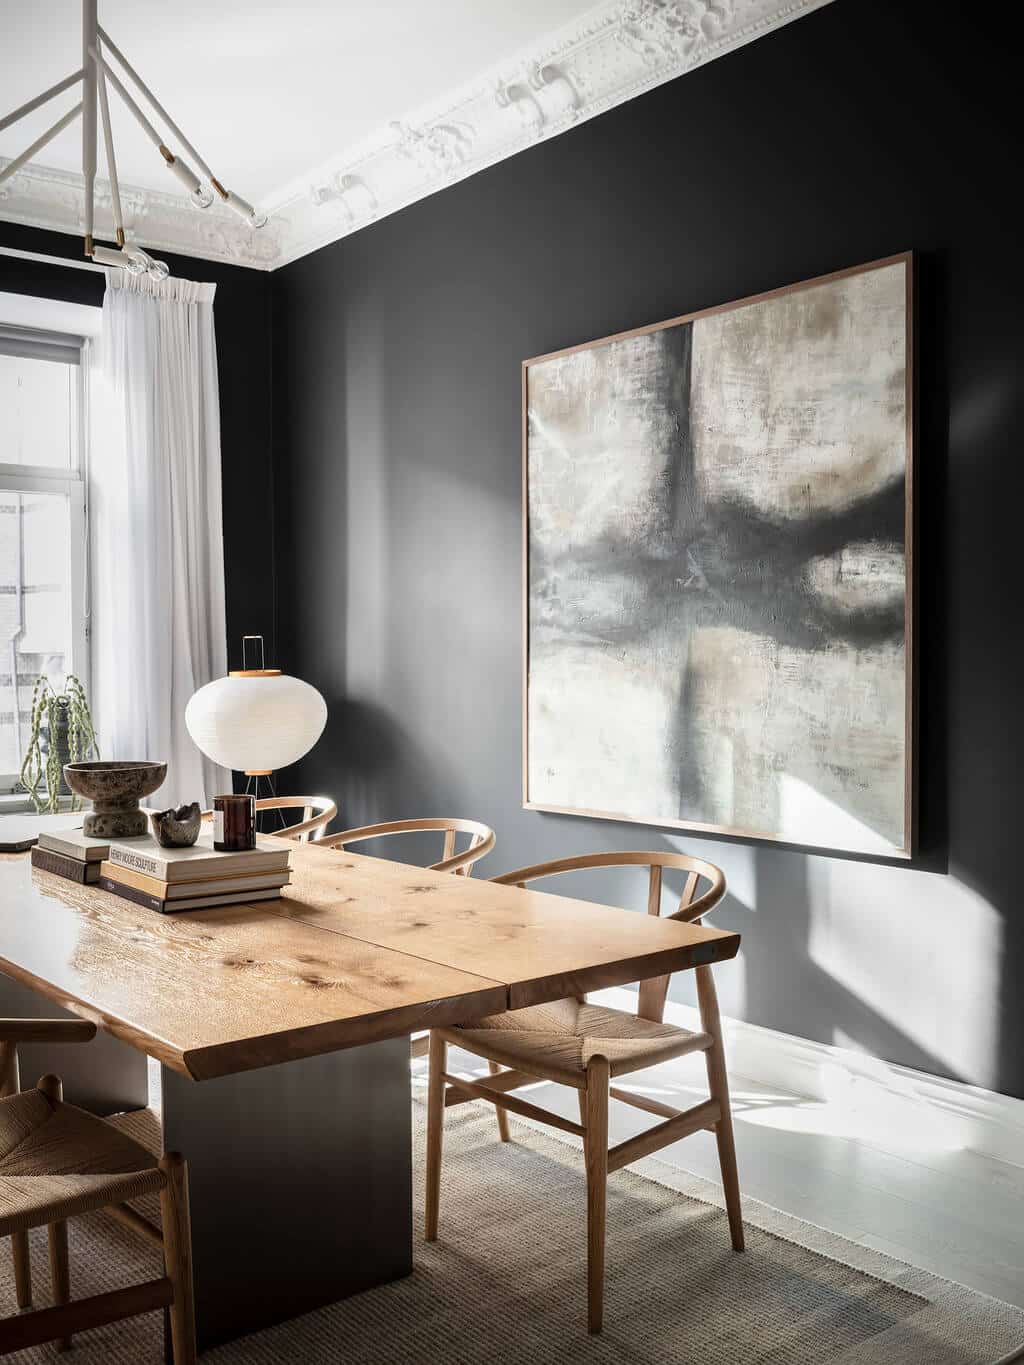 Create Contrast With Black mid century modern dining room